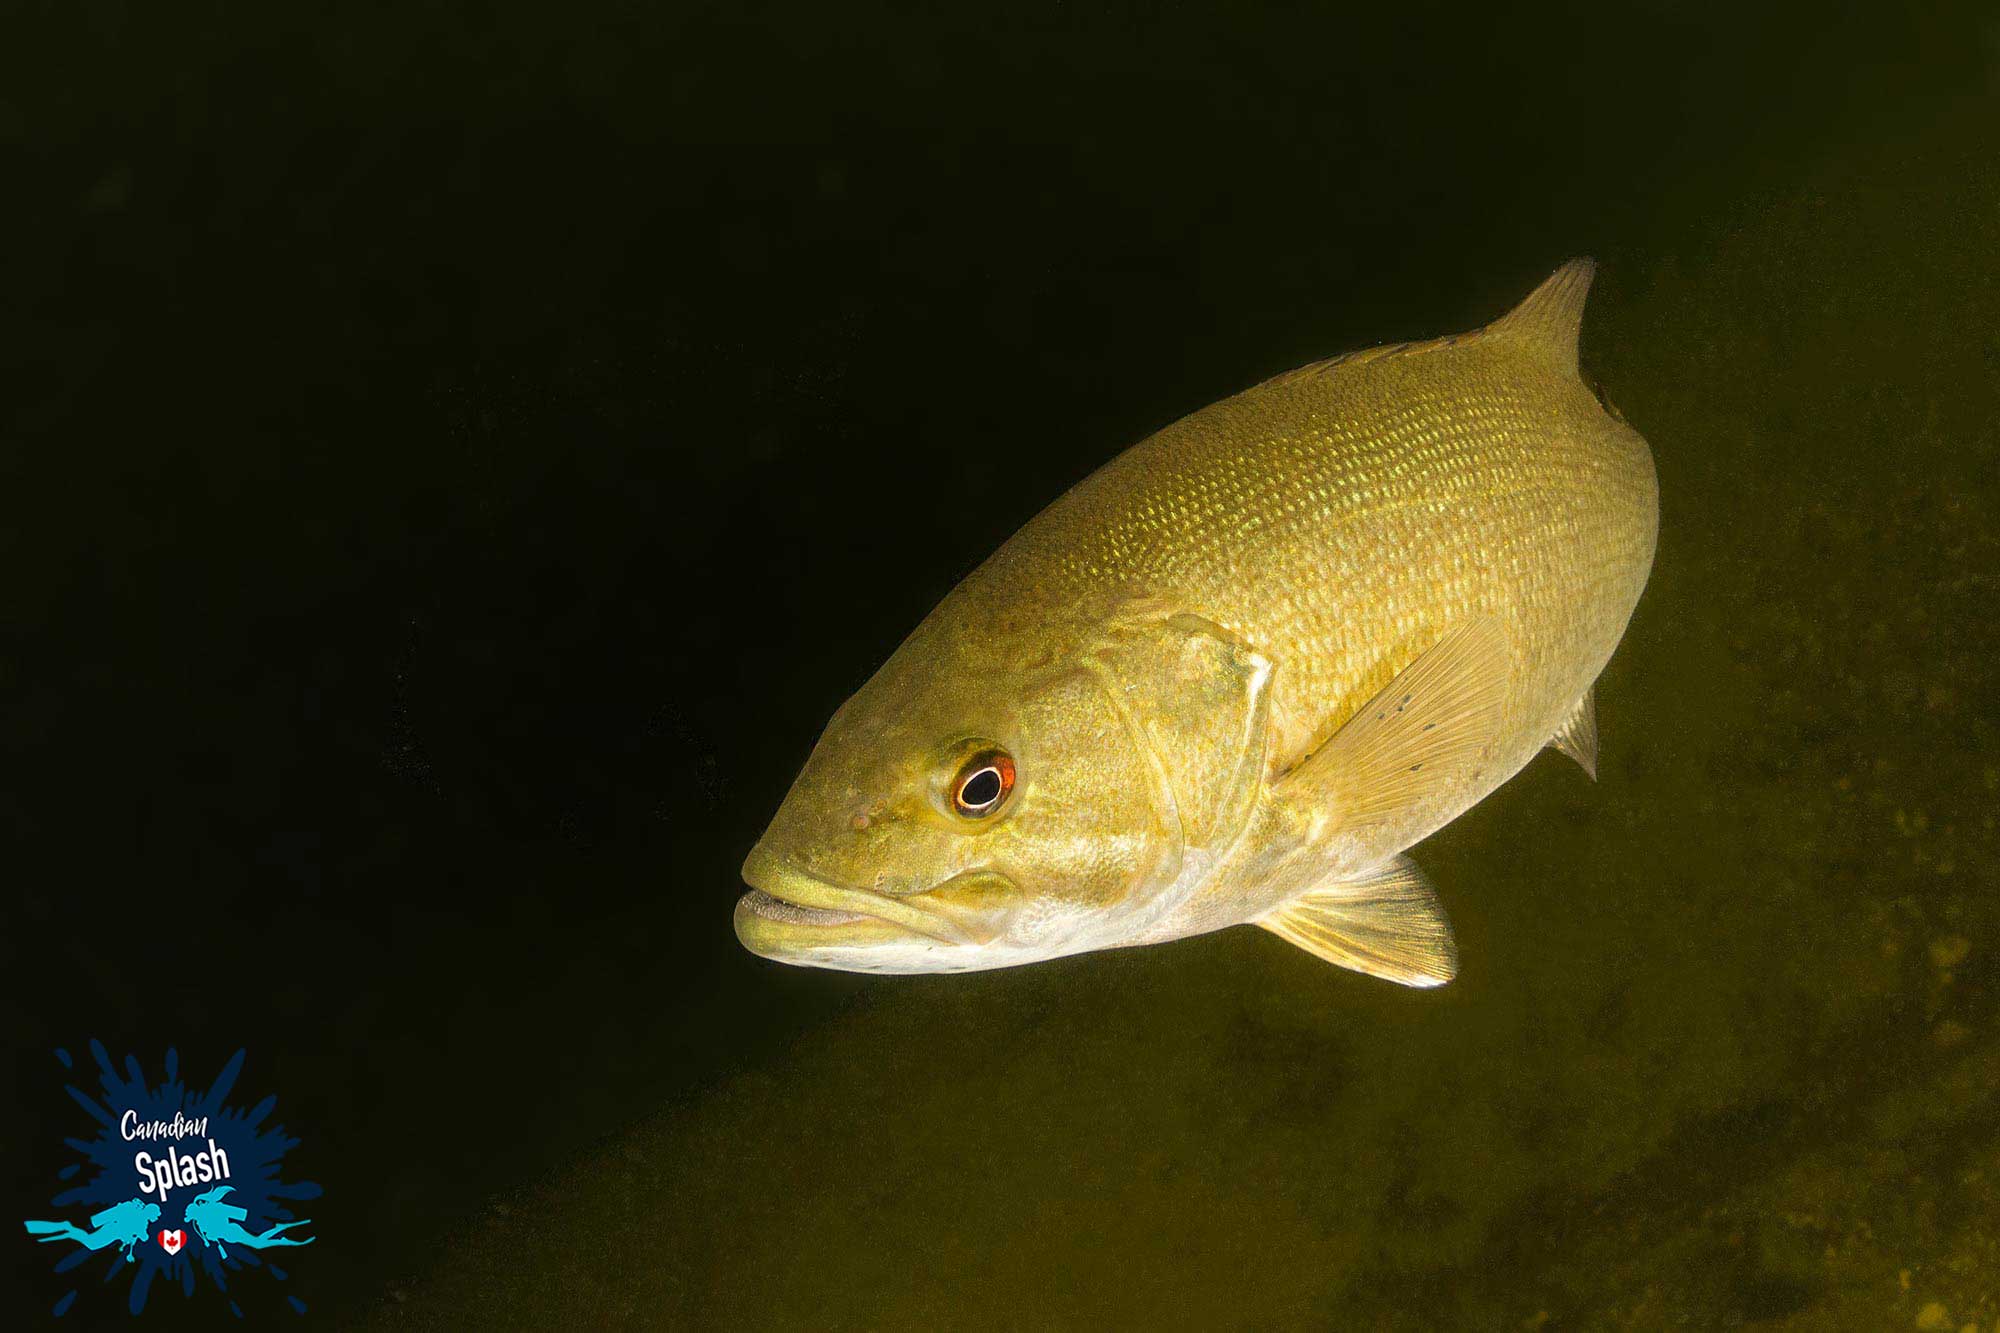 A Bass Fish Swimming In The Dark Depths Of West Hawk Crater Lake In Manitoba, Canada Underwater